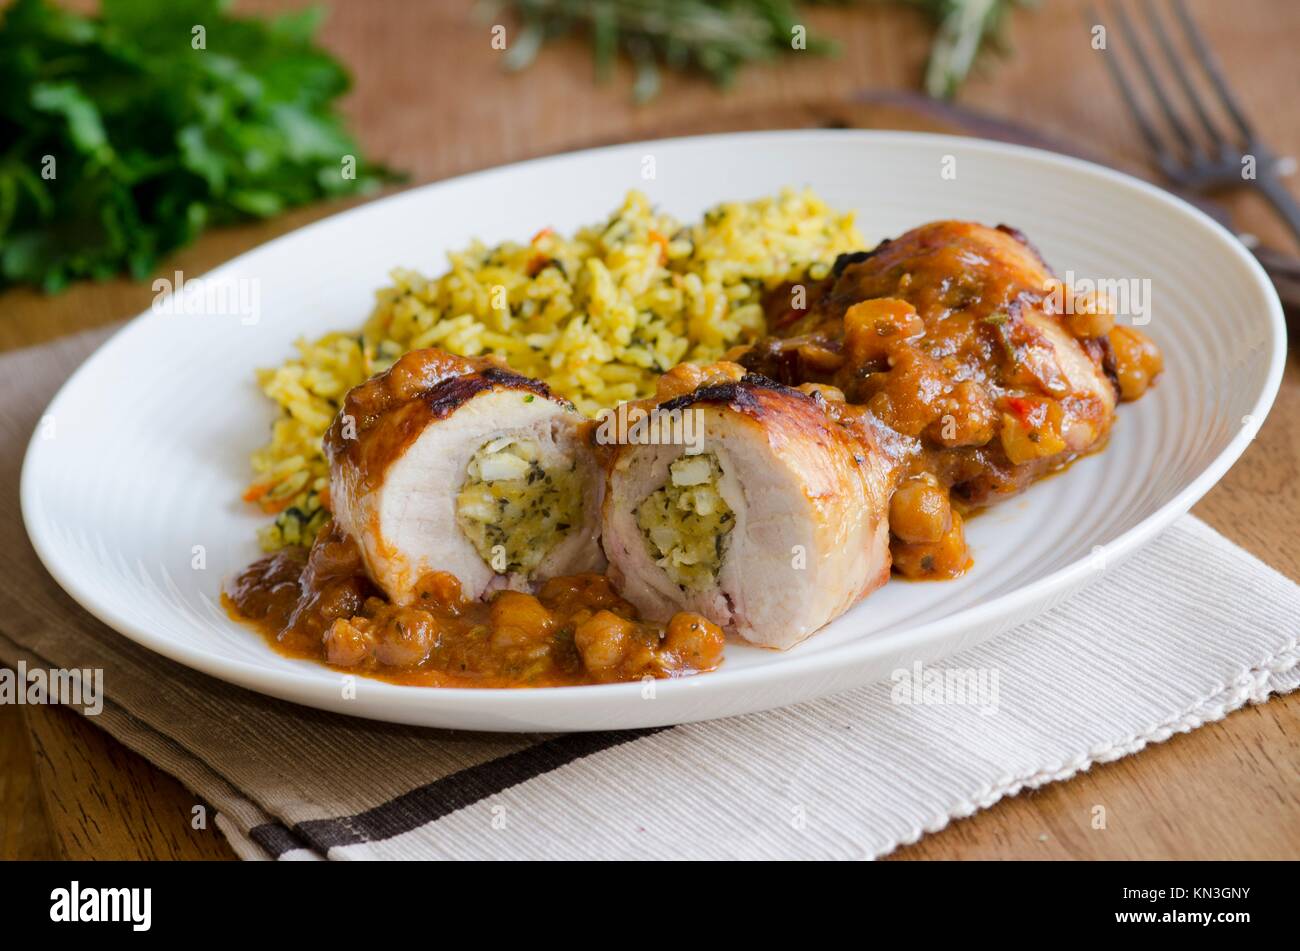 Stuffed chicken thighs in an aromatic spiced tagine sauce with carrot pilau rice. Stock Photo